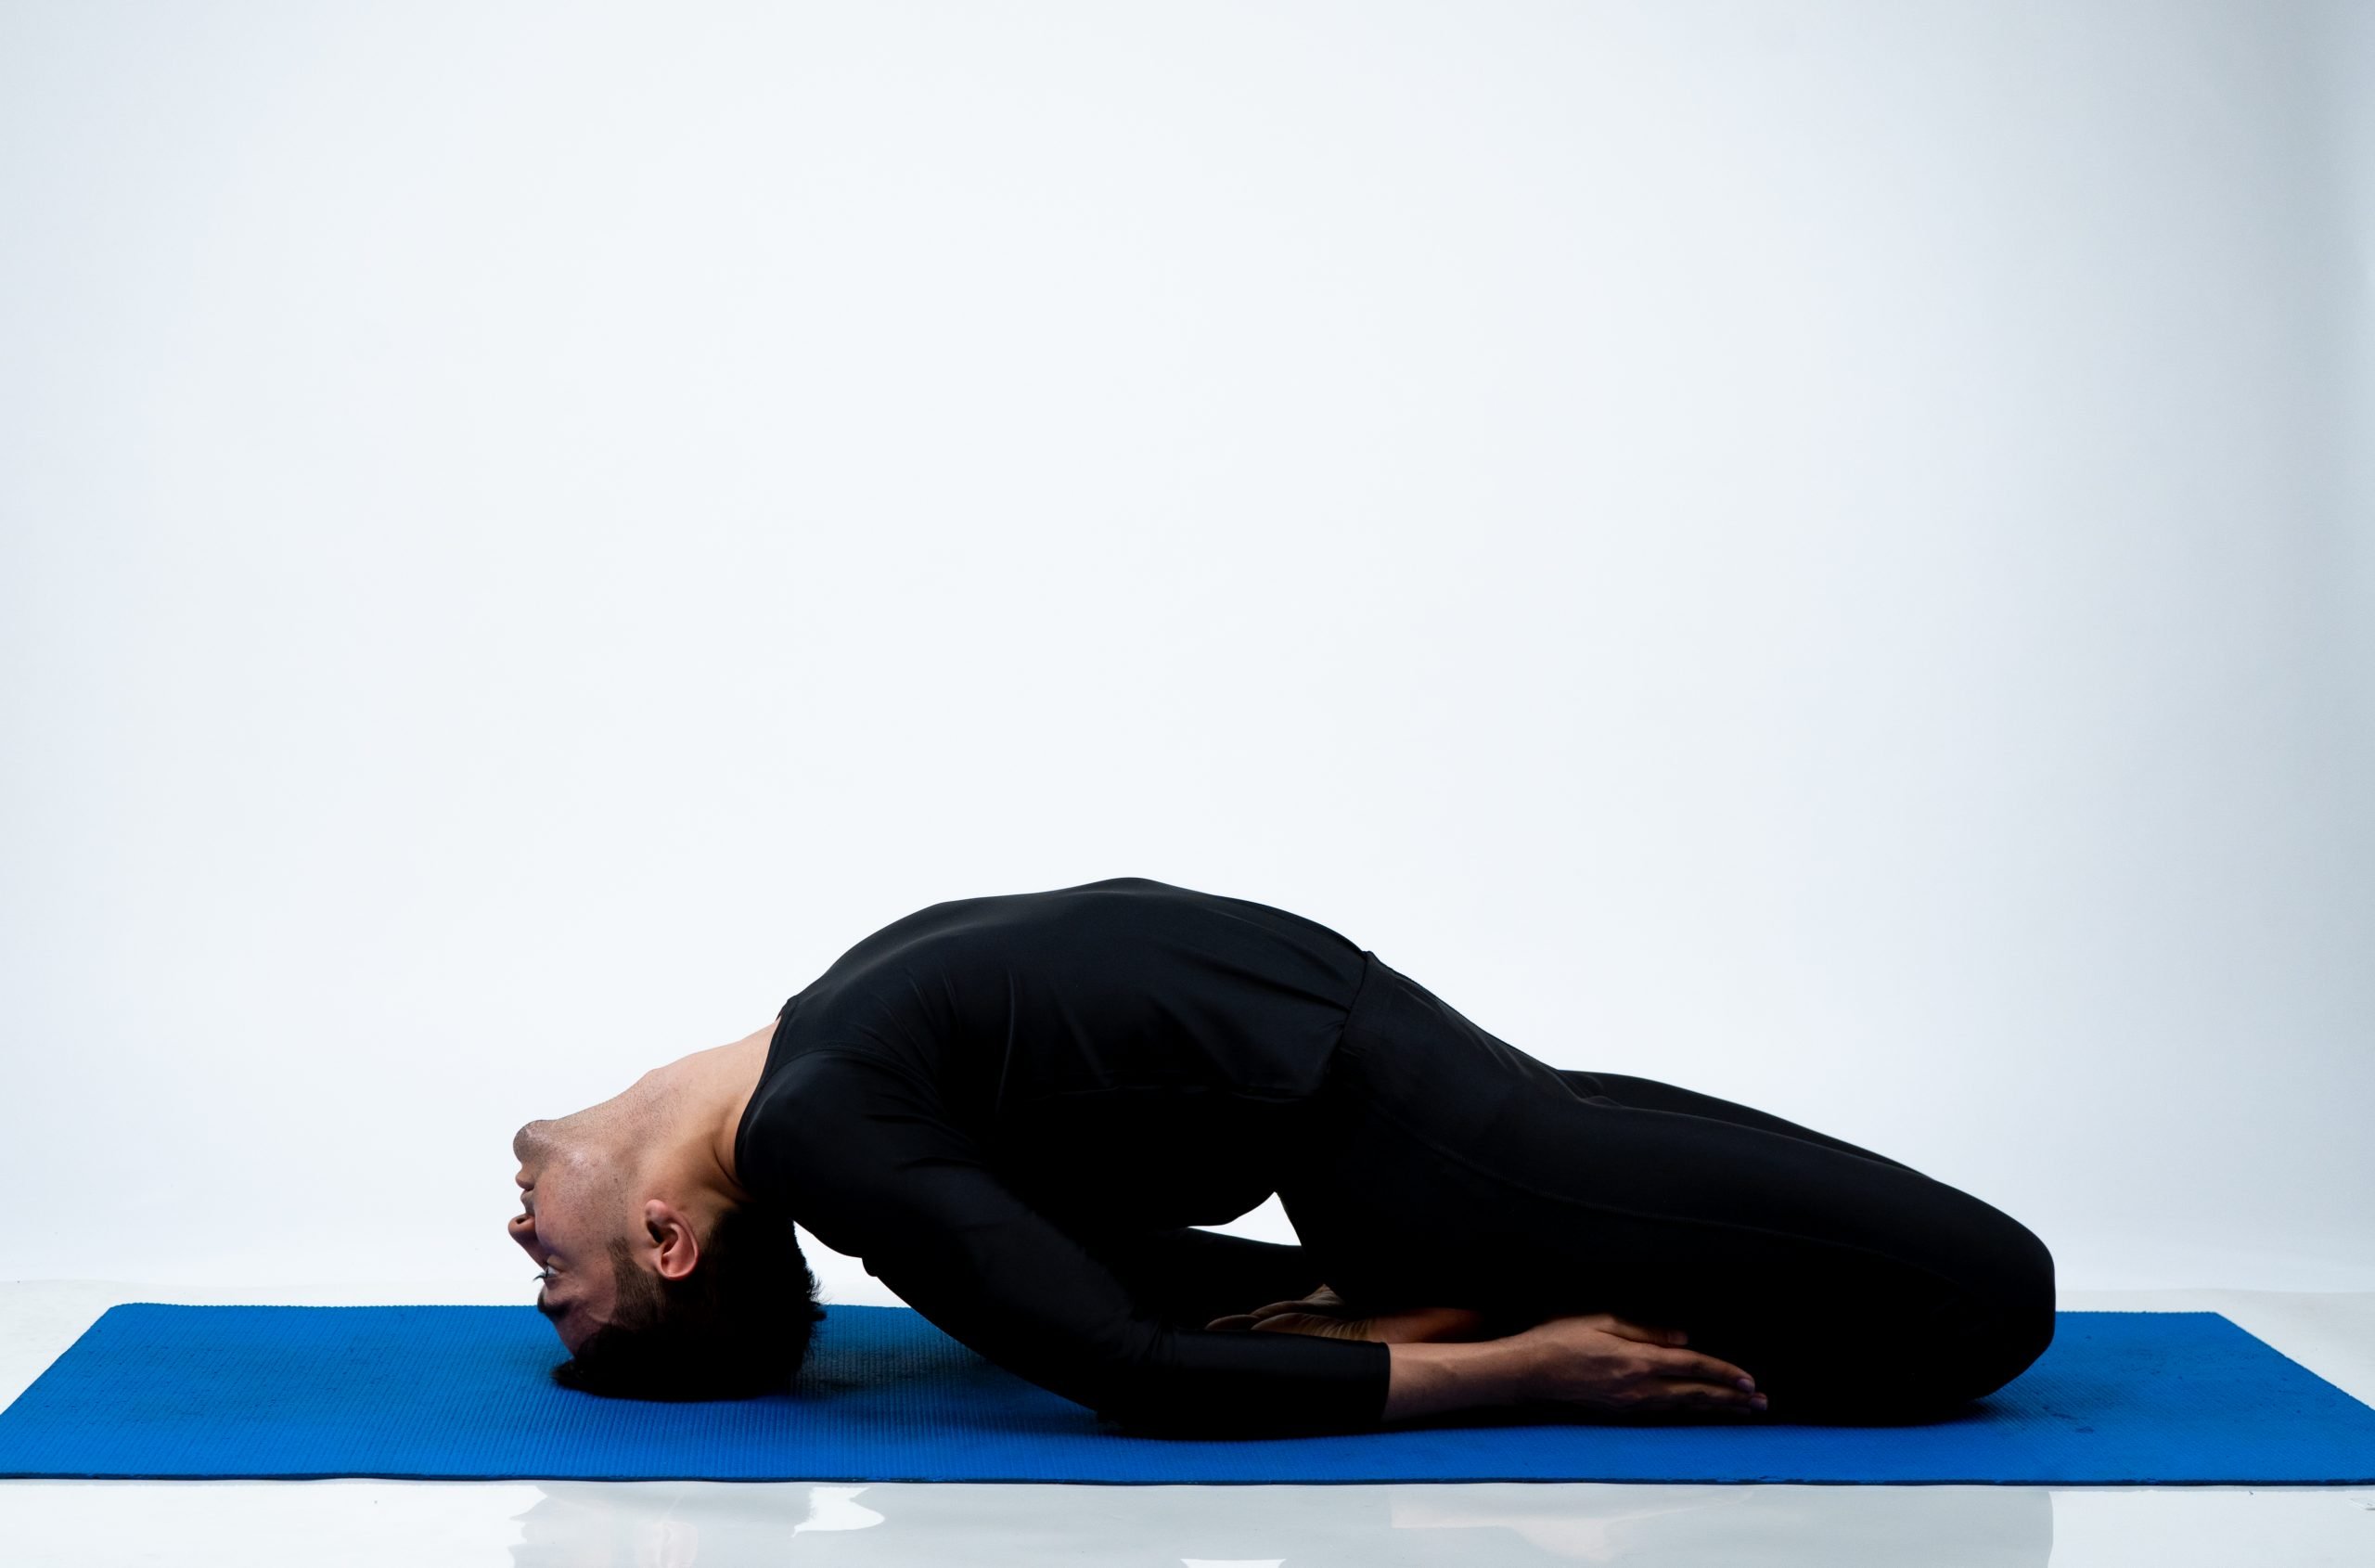 10 Yoga Poses for Digestion to Ease Tummy Troubles | YouAligned.com